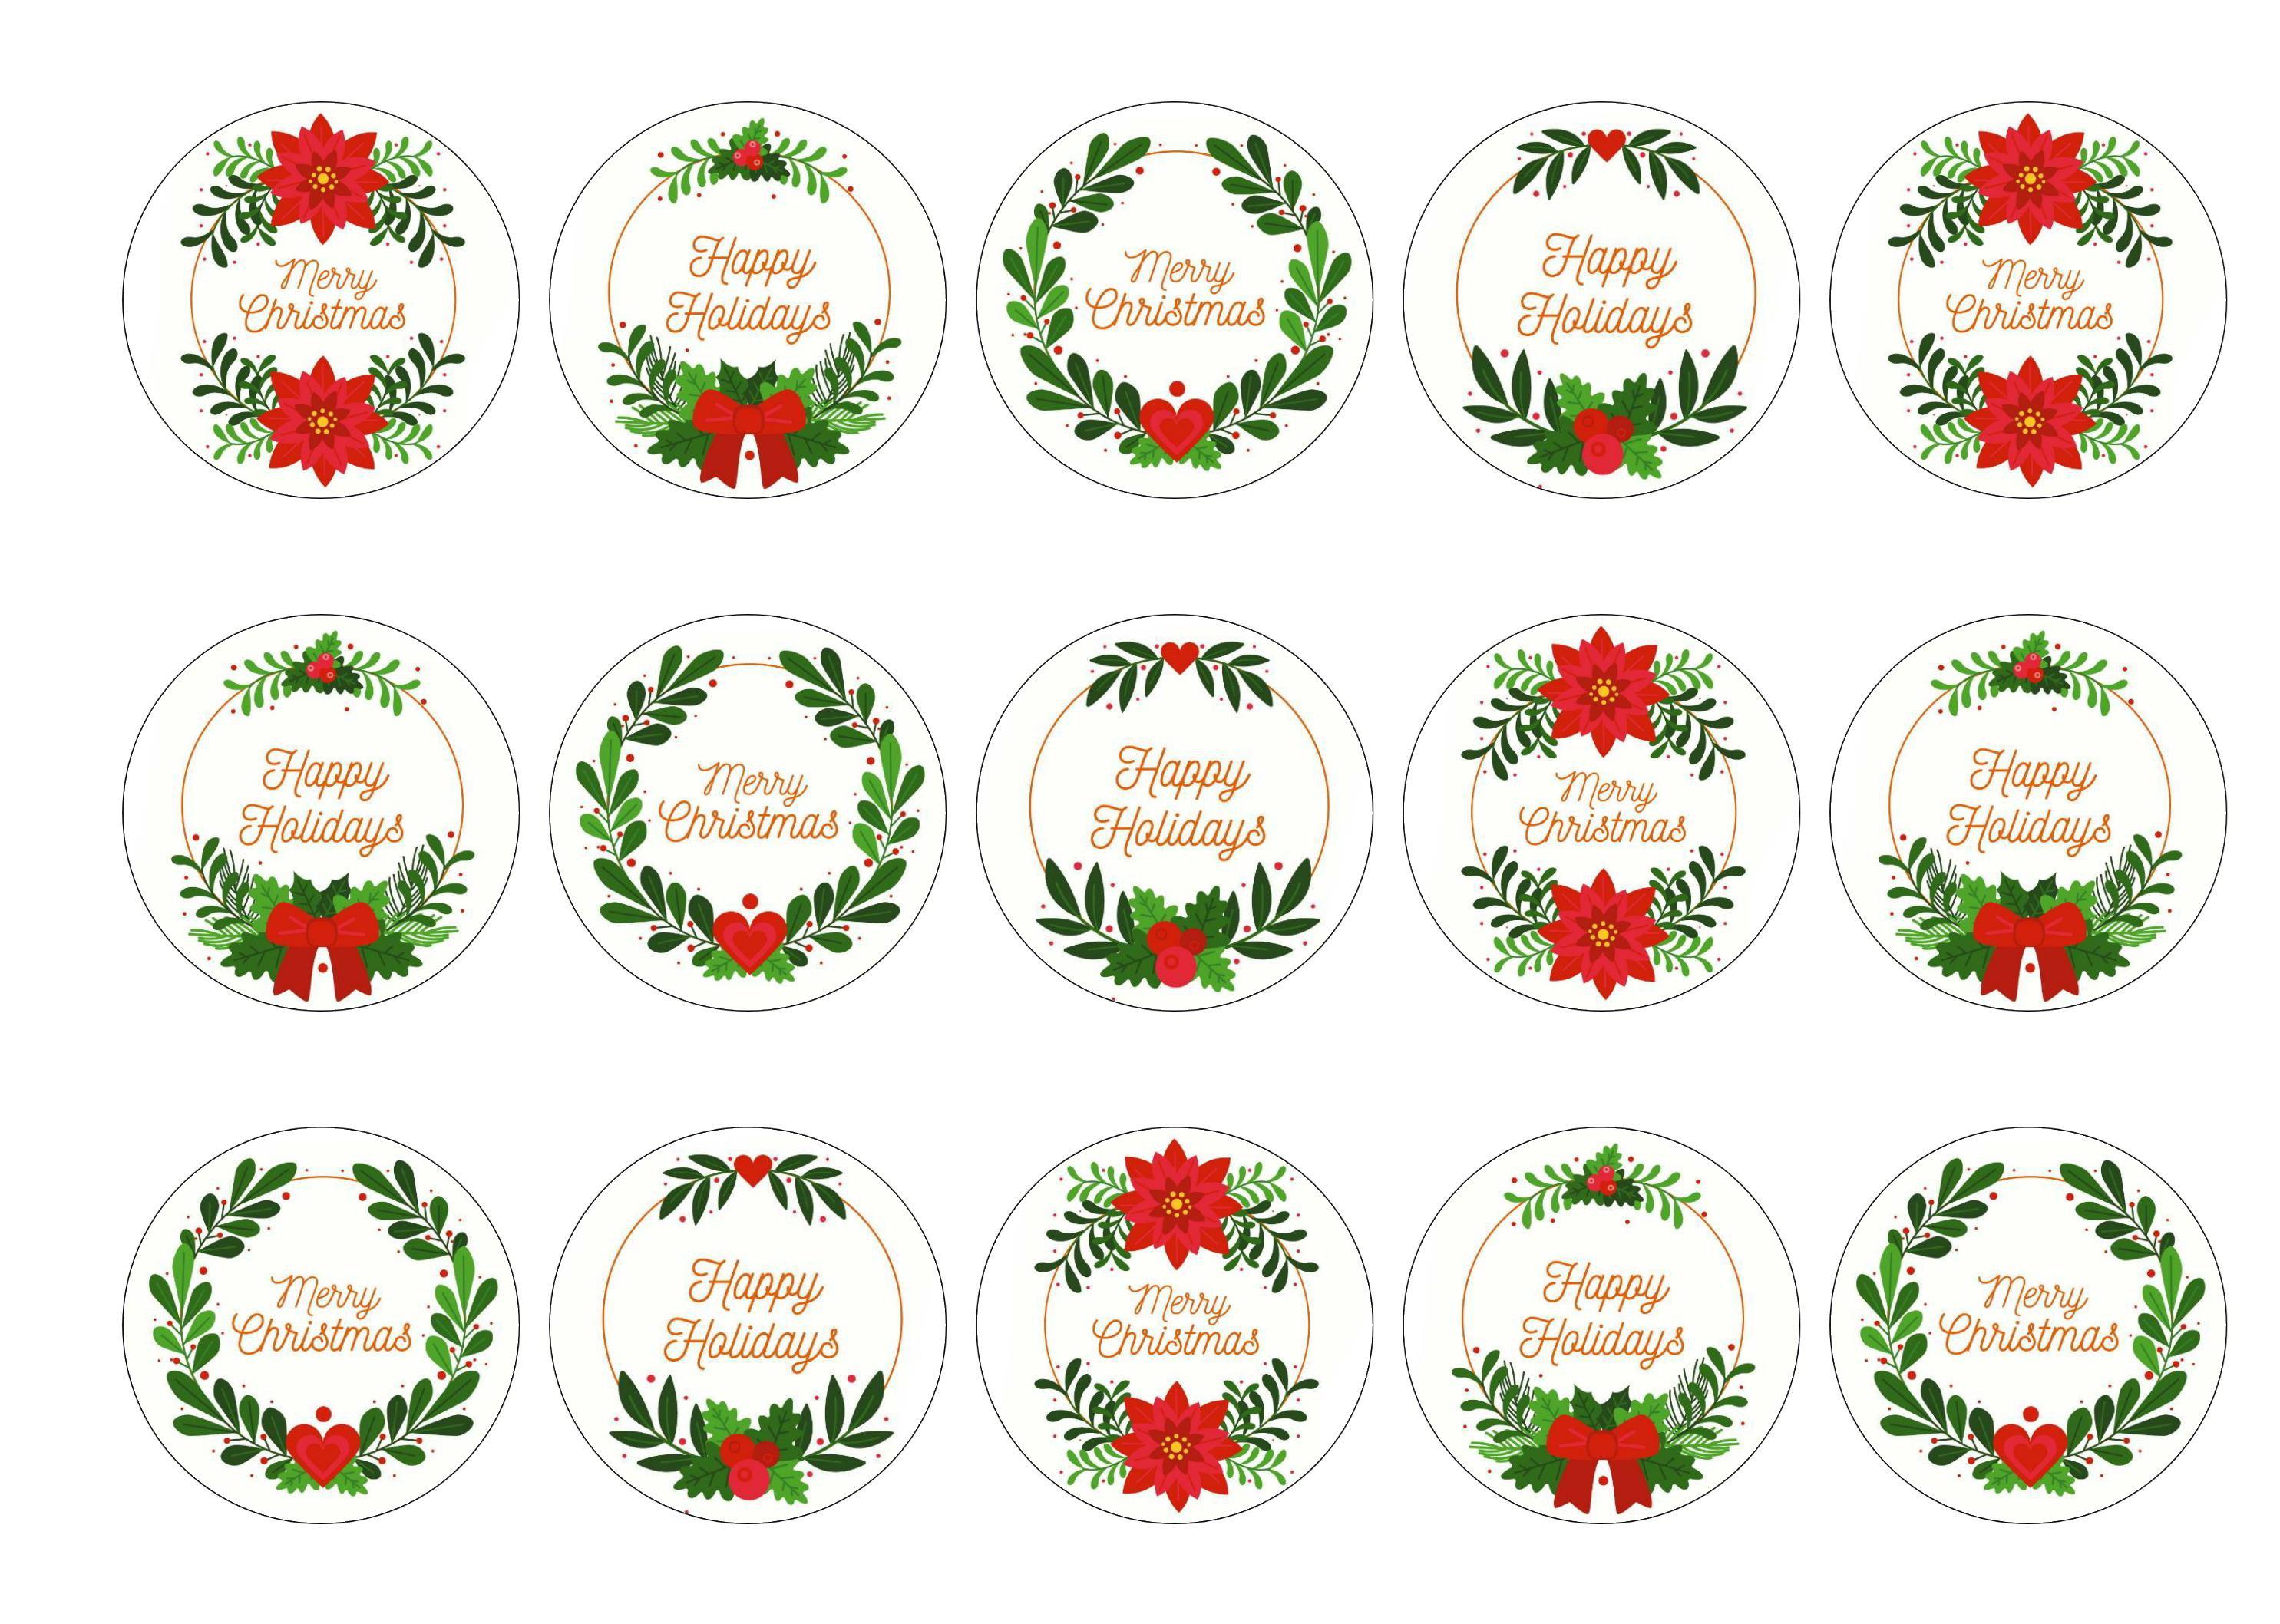 15 toppers with Christmas Wreath designs 